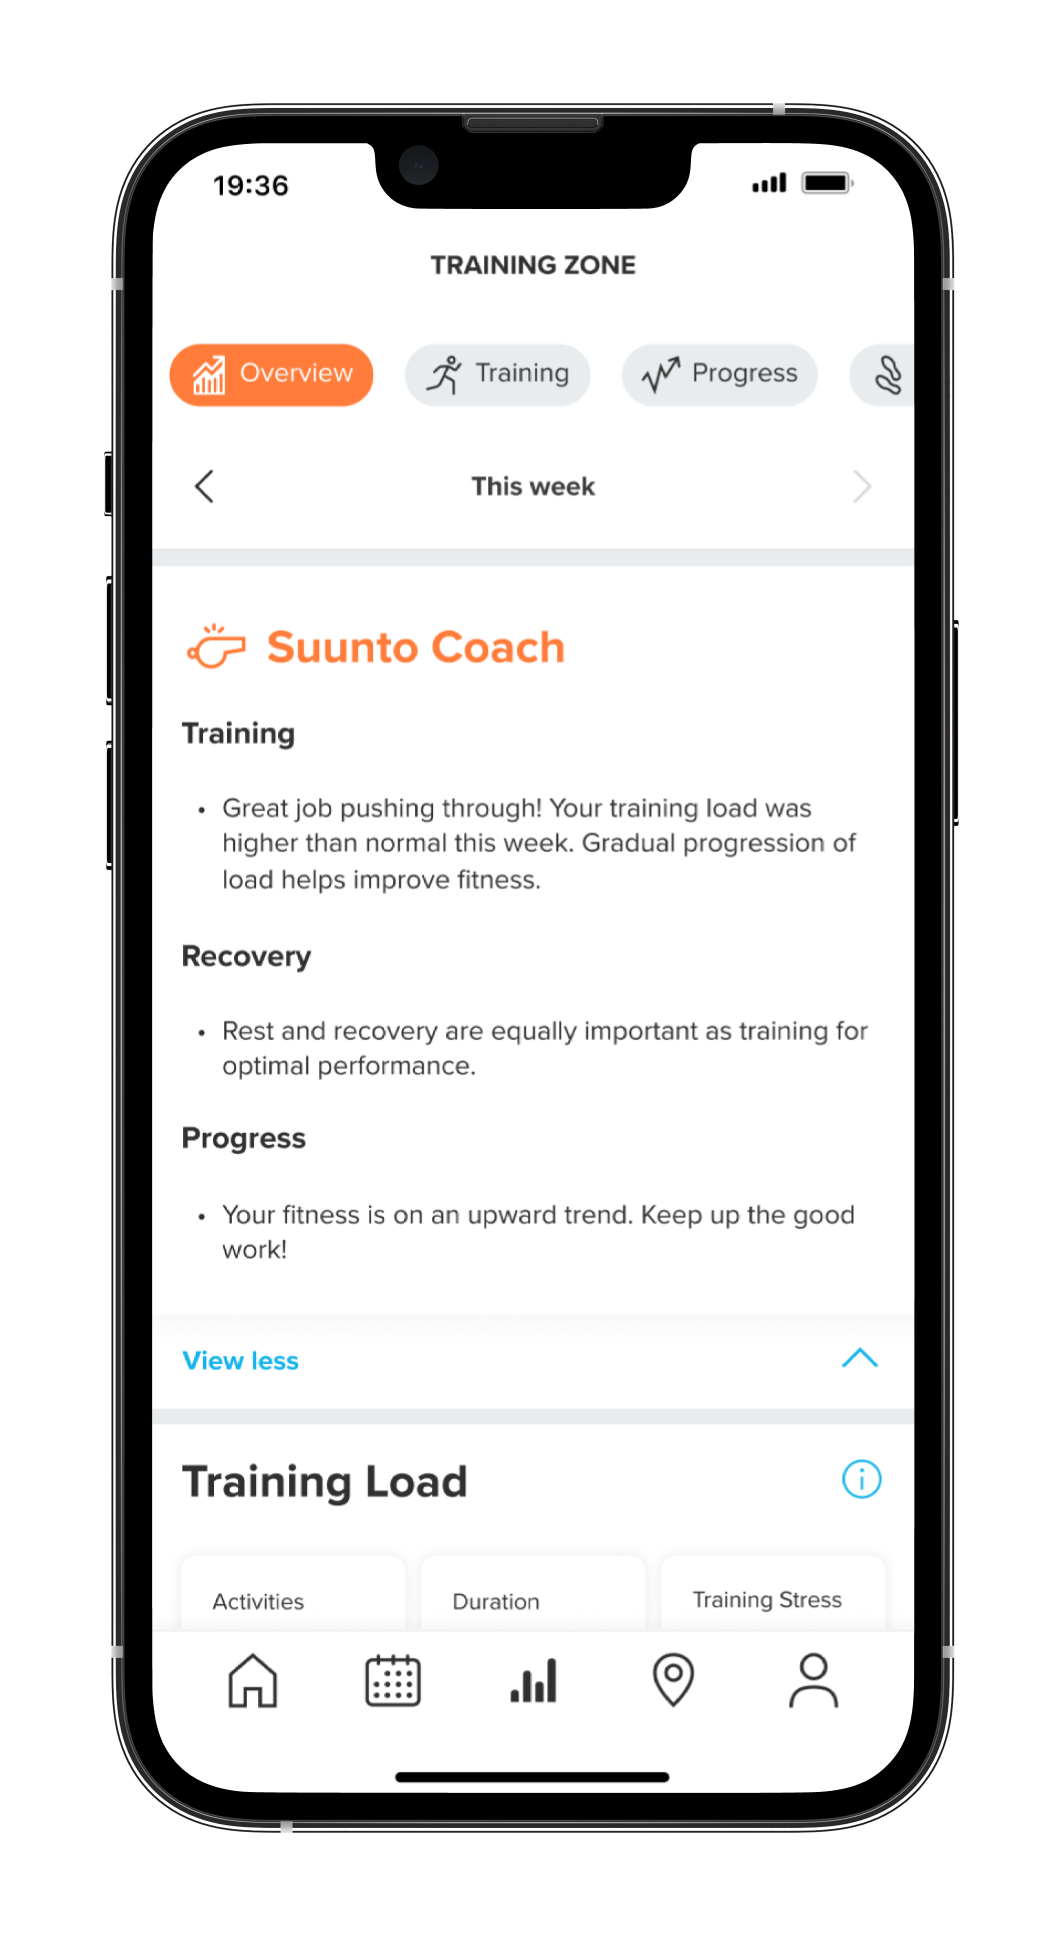 Suunto coach is an integral part of Suunto app’s Training zone: It helps you pay attention to the right data for your progress and well-being. 